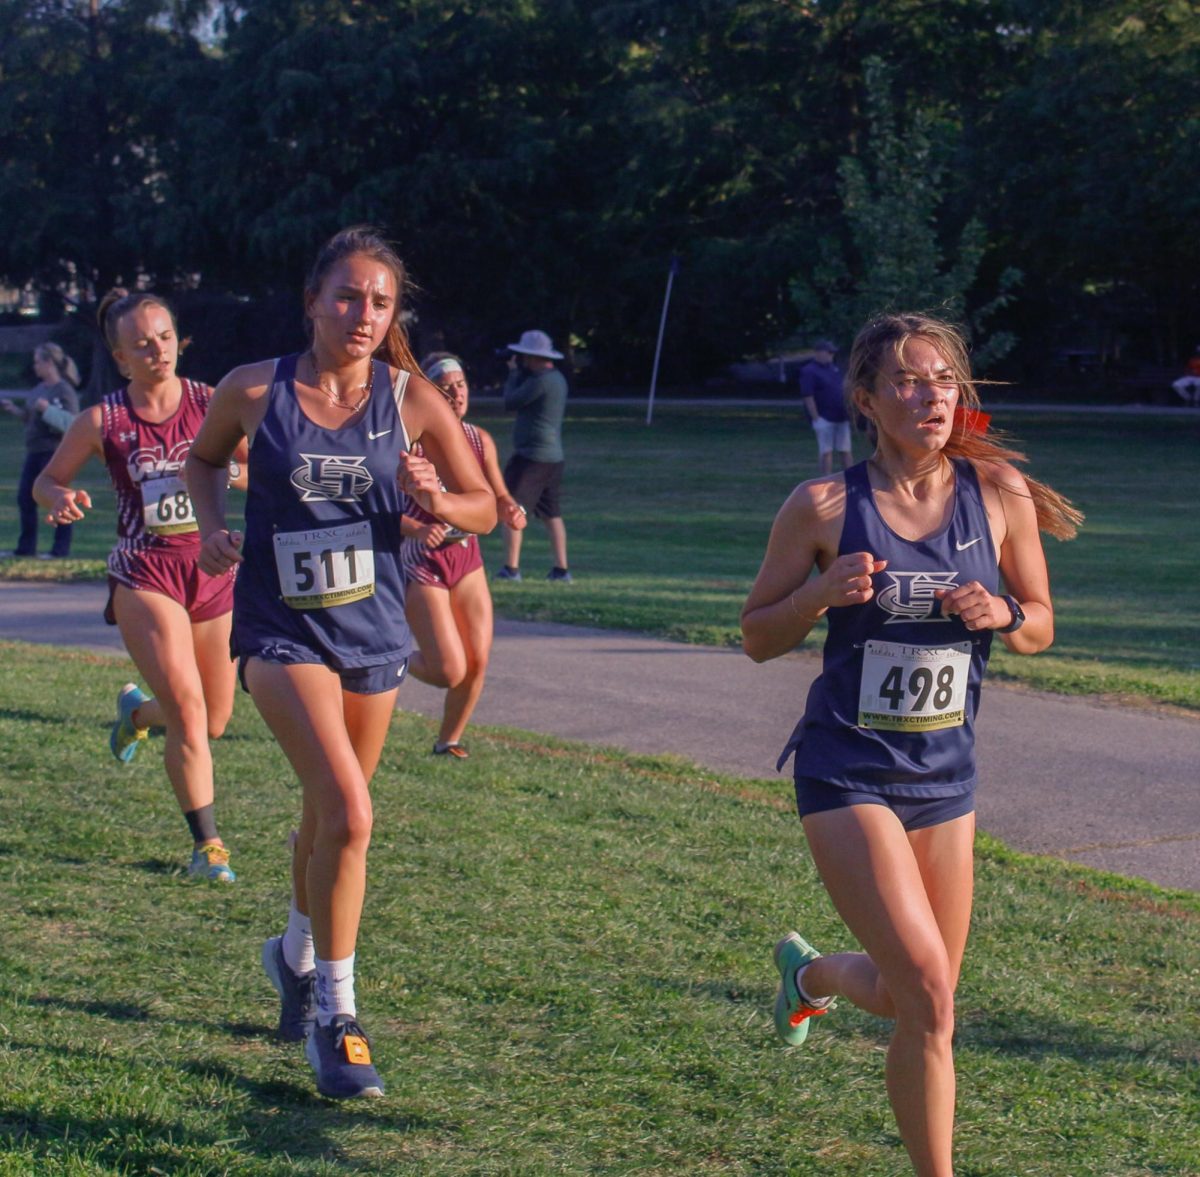 Ally Brower and Layla Sanchez keep a steady pace as they make their way across the track.